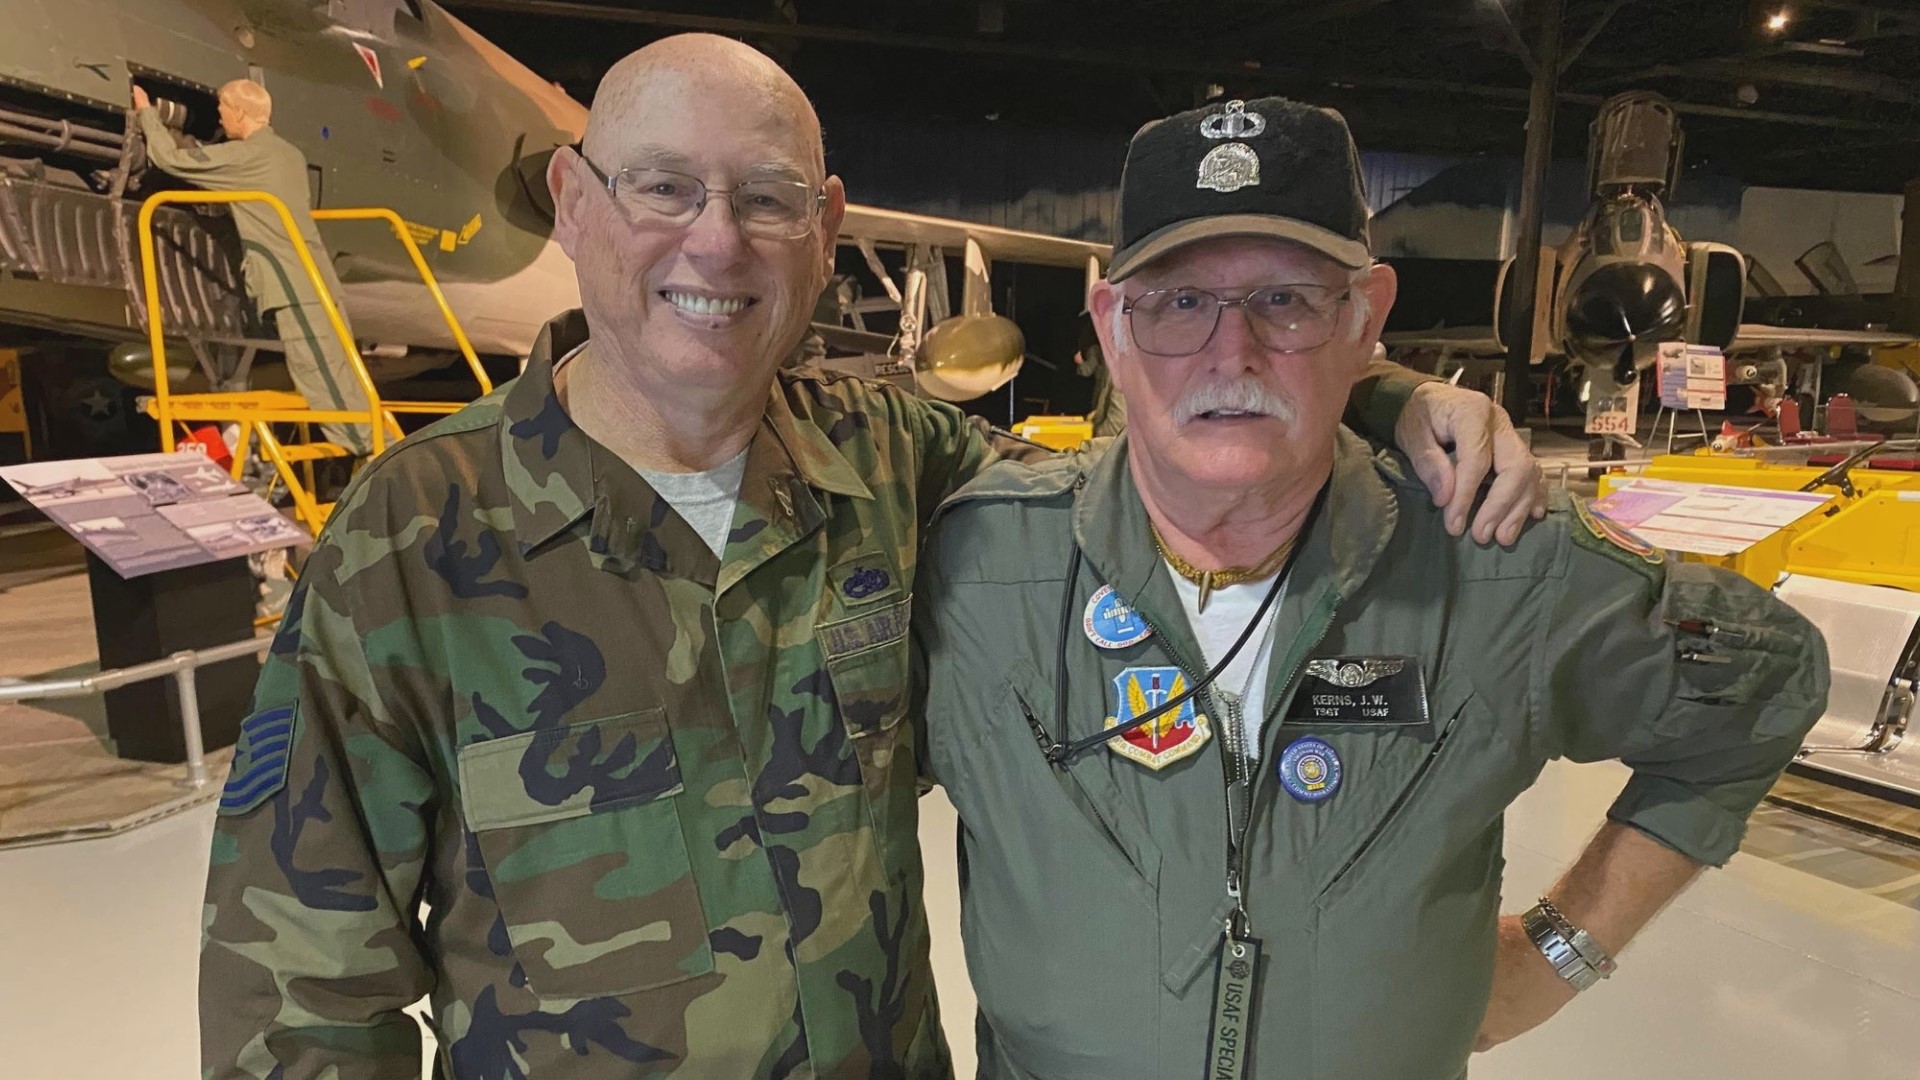 They served at Hahn Air Base in Germany in 1971 and retired at Robins Air Force Base. After retirement, they became museum volunteers, reconnecting 45 years later.